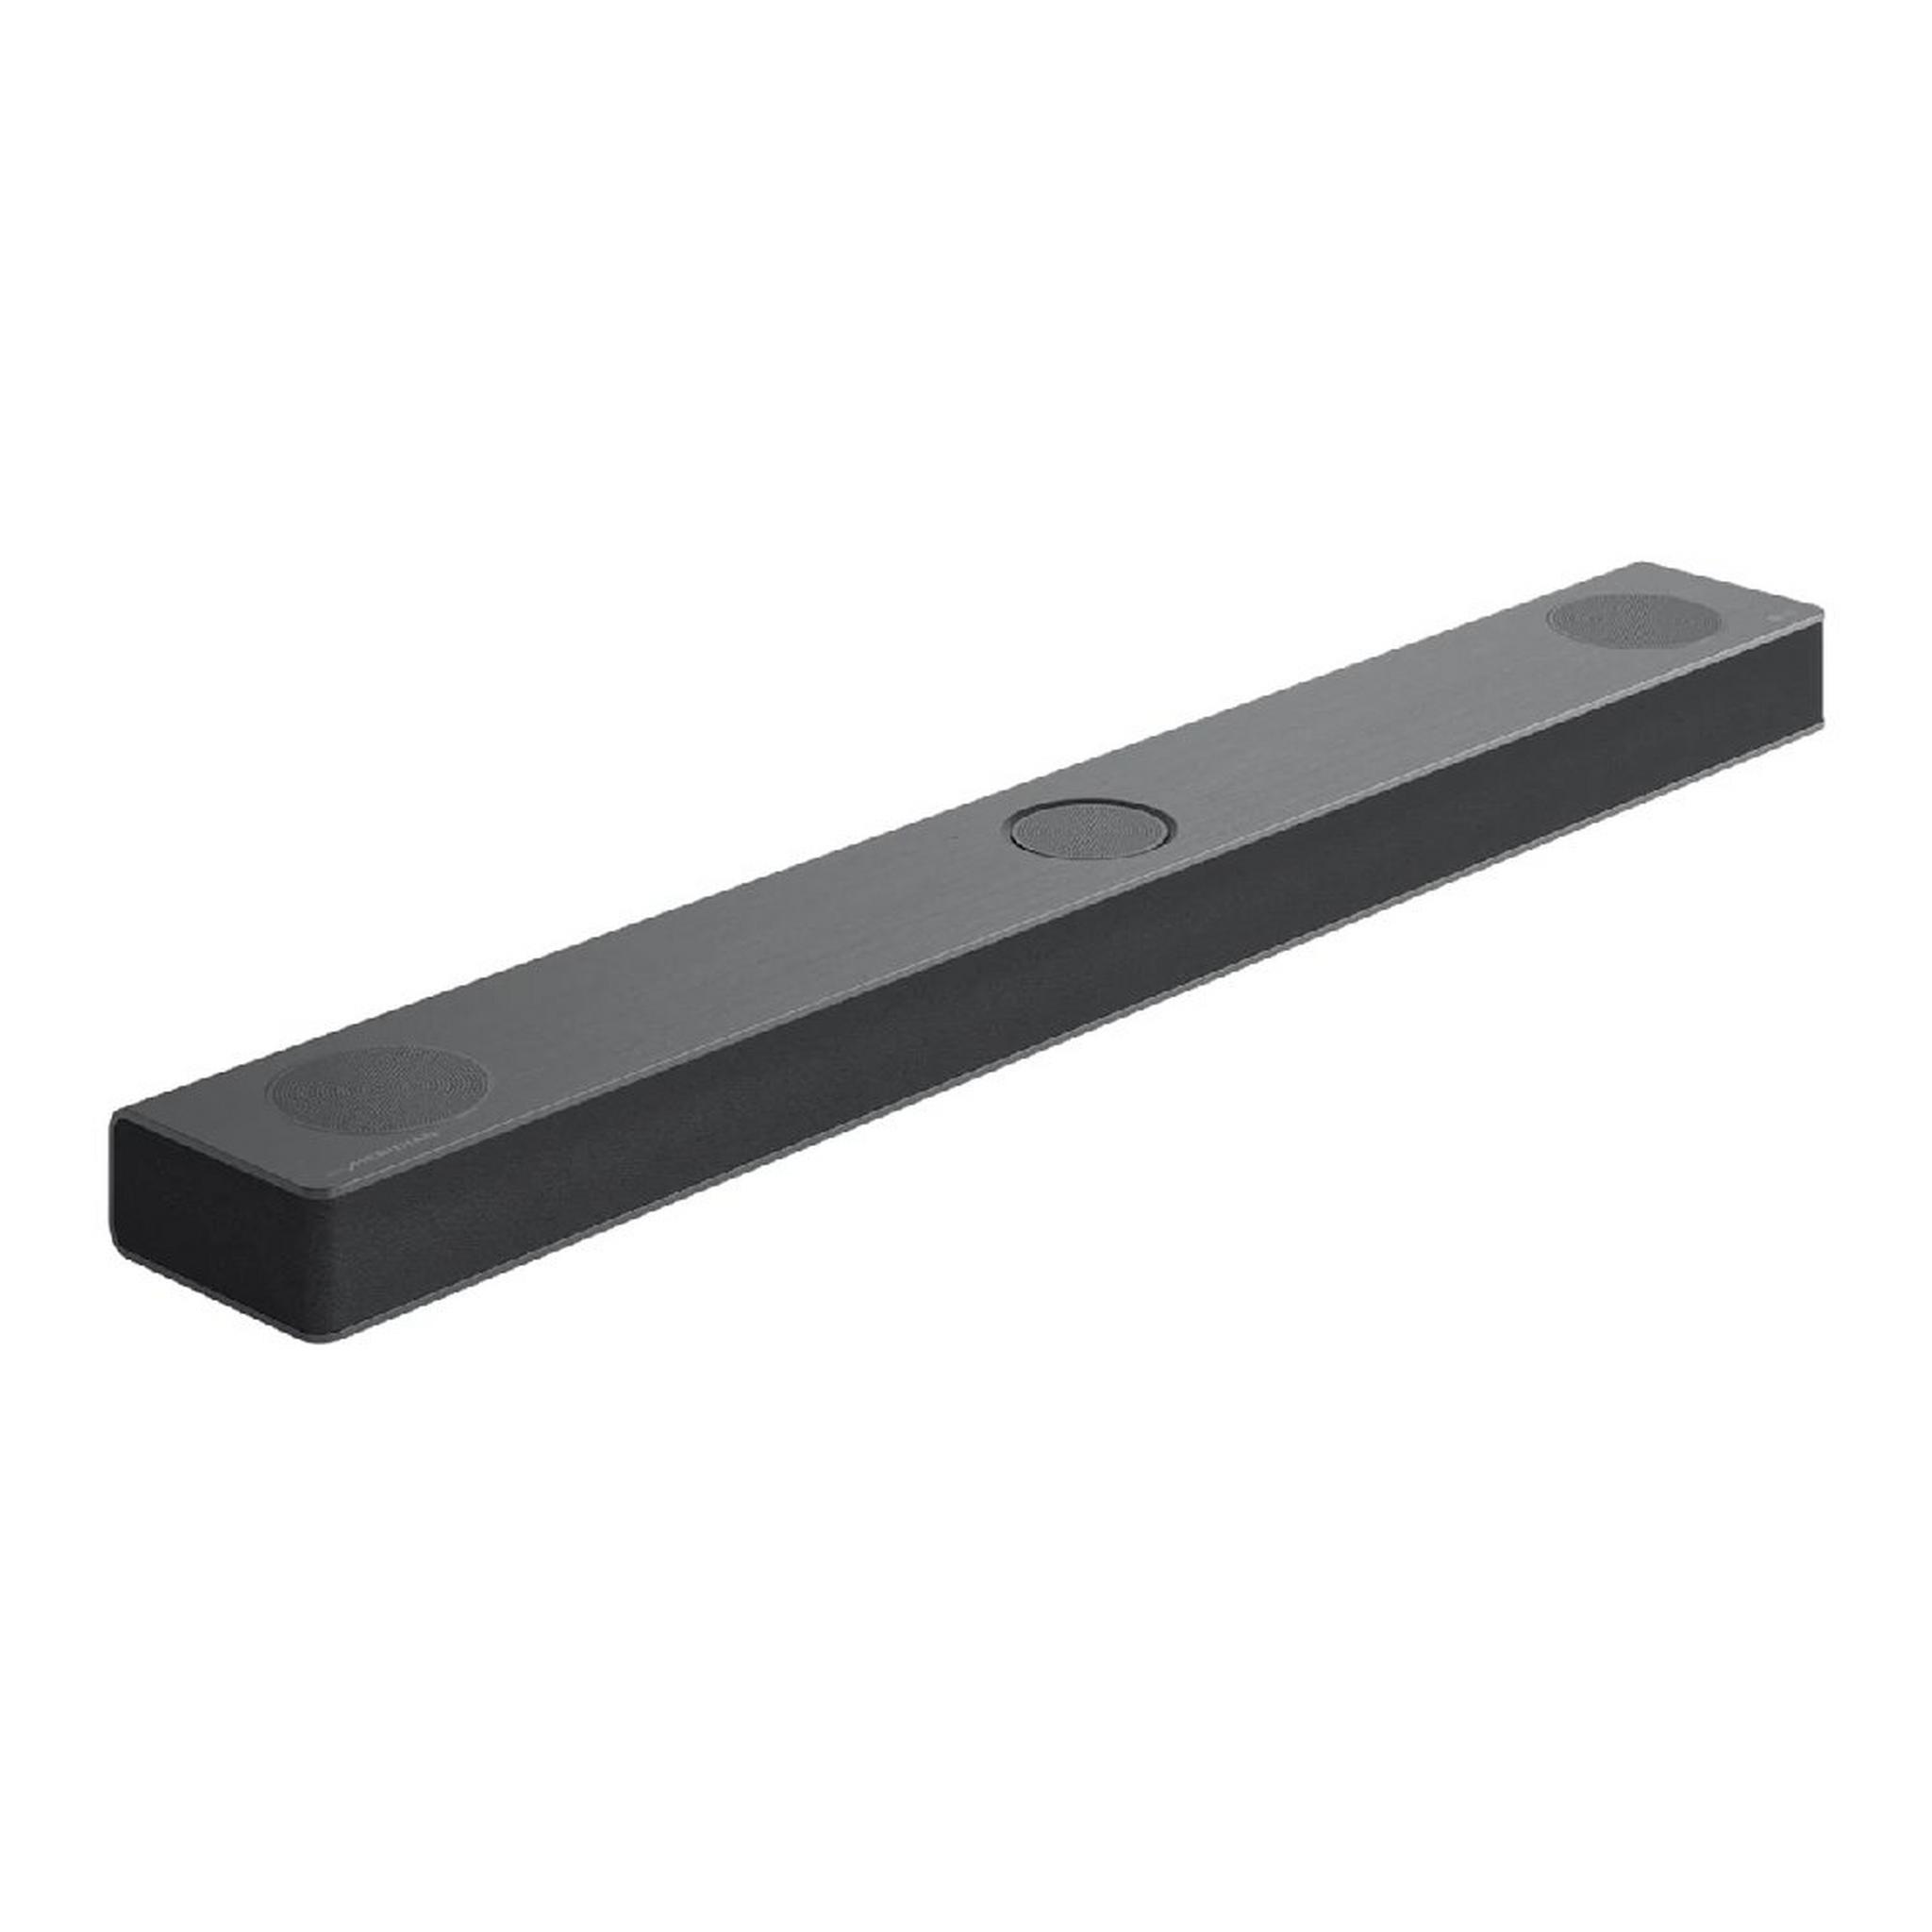 LG Sound Bar, Subwoofer and Surround Speakers, 5.1.3 Channel, 620 Watts, S80QR – Black